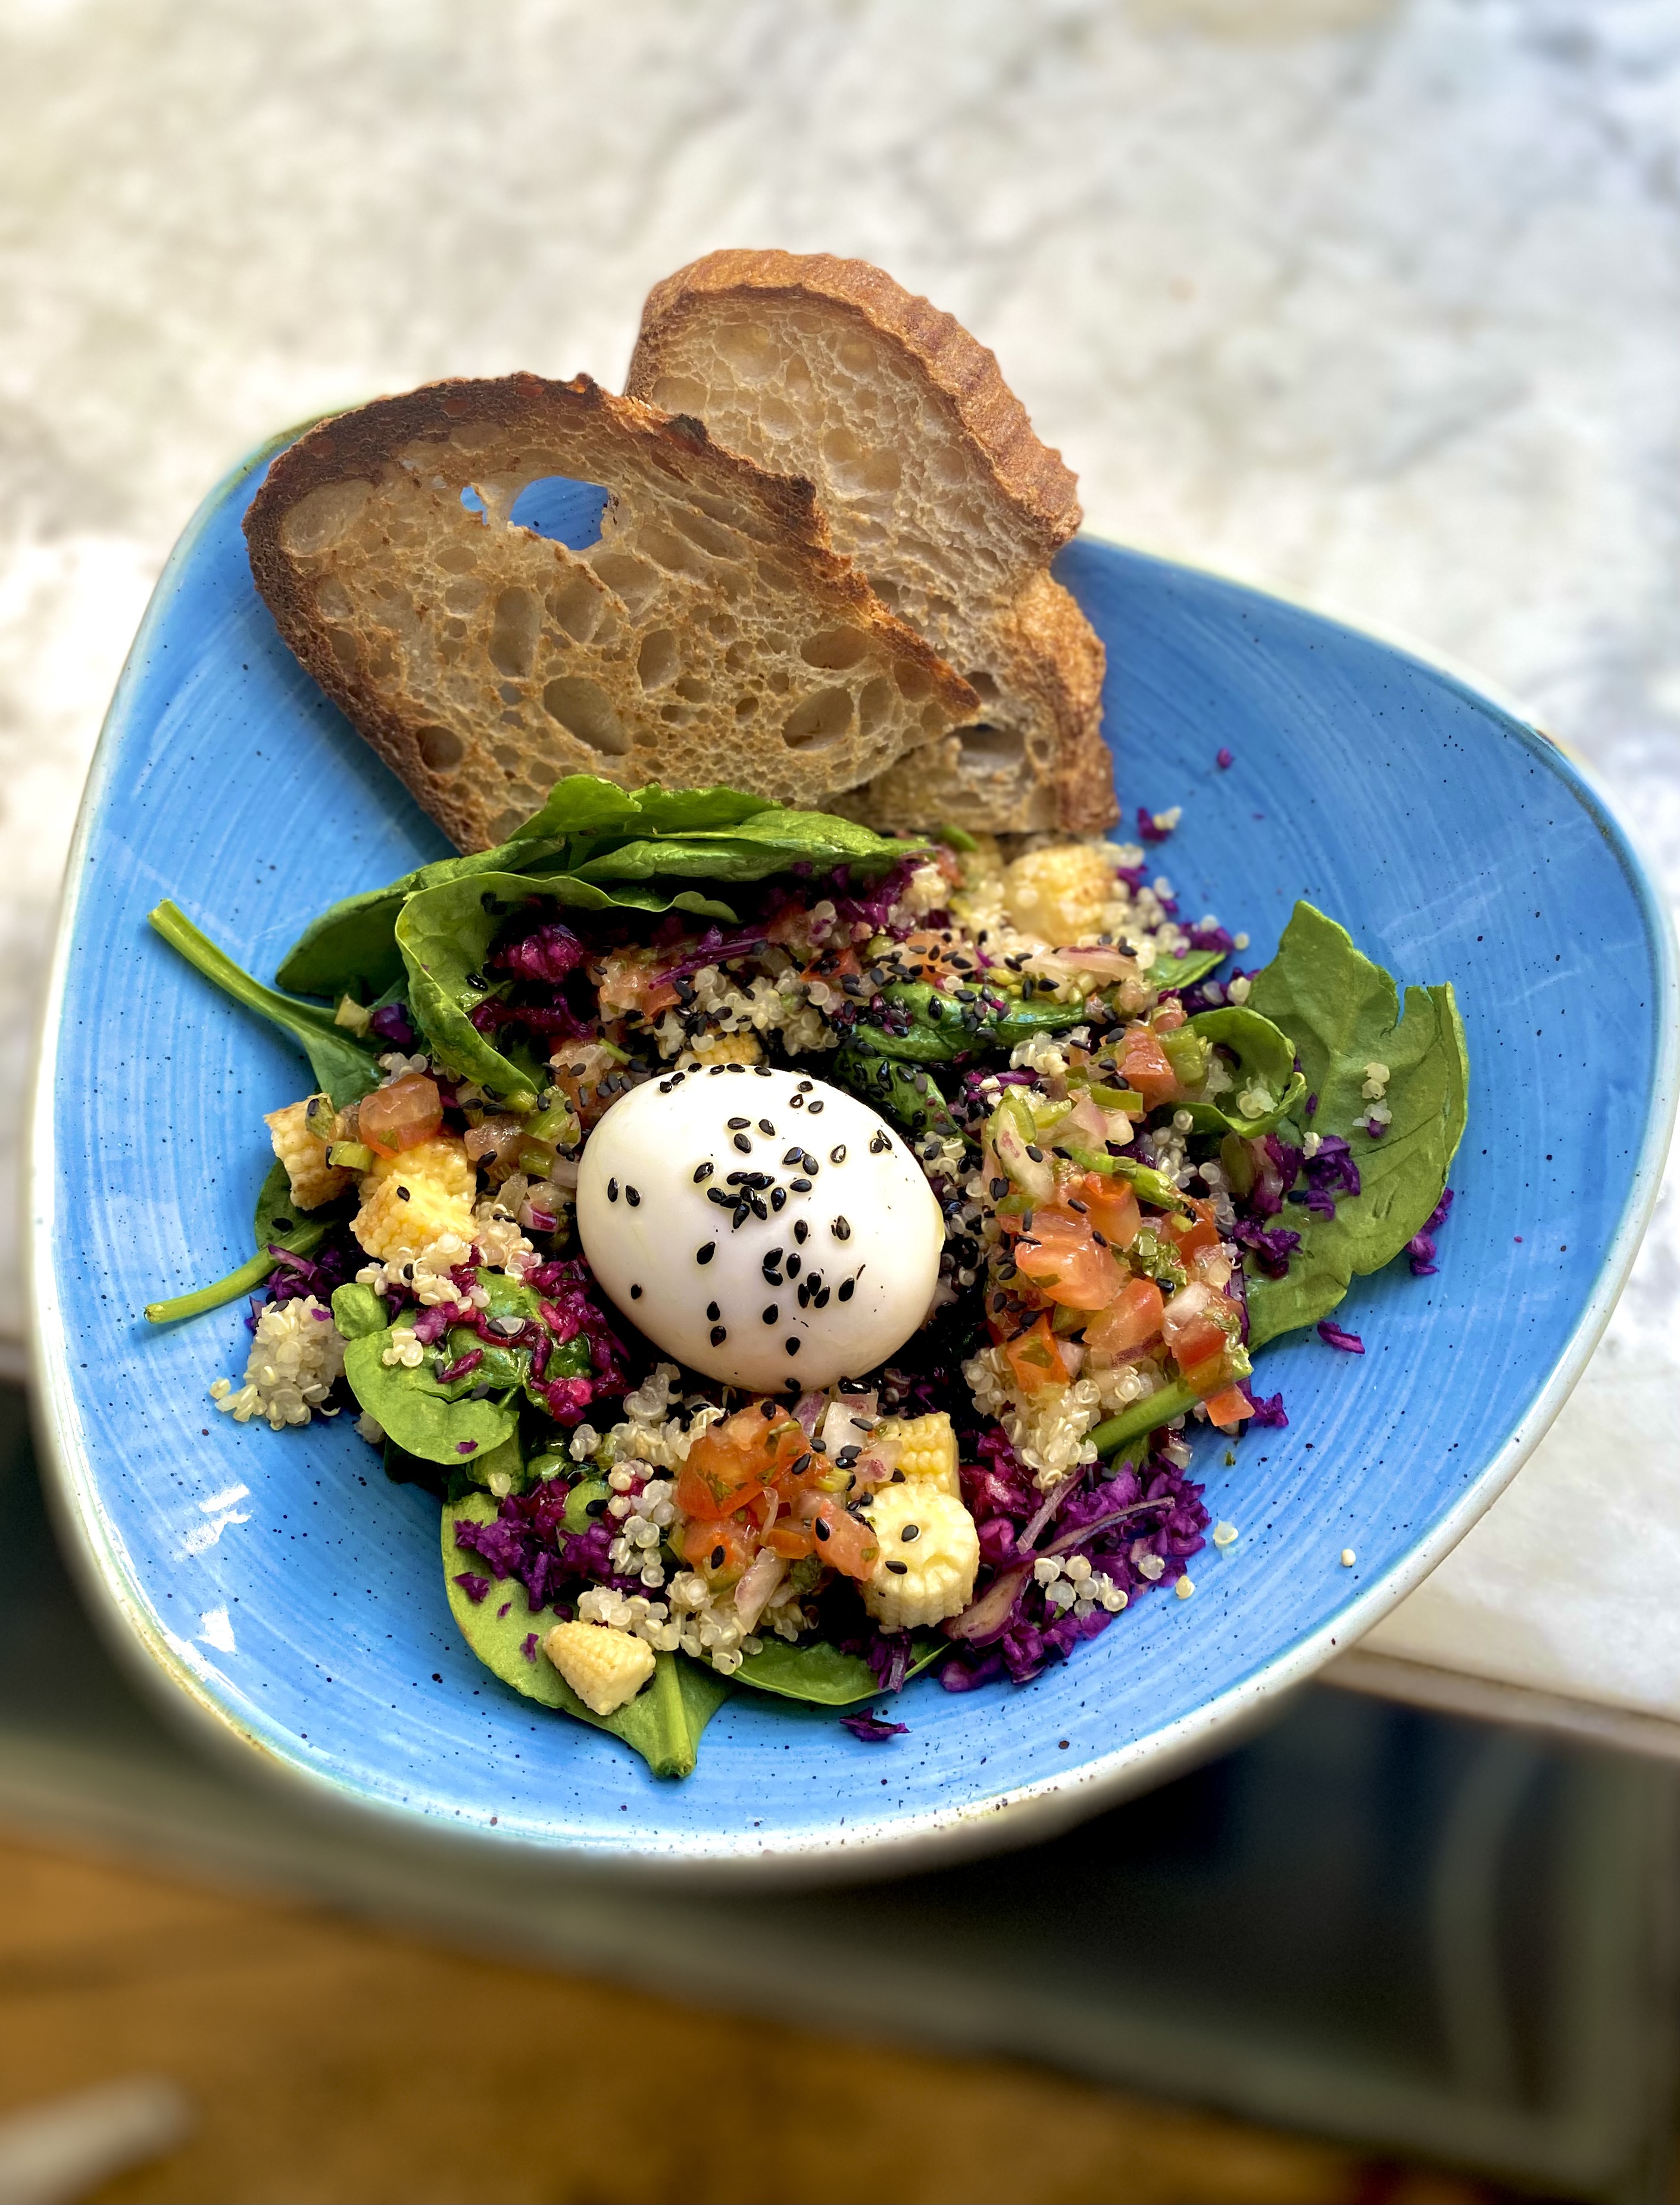 RAINBOW SALAD : Mix of spinach and quinoa with red cabbage, sweet corn, feta cheese, pico de gallo and an egg. Served with sourdough bread. 